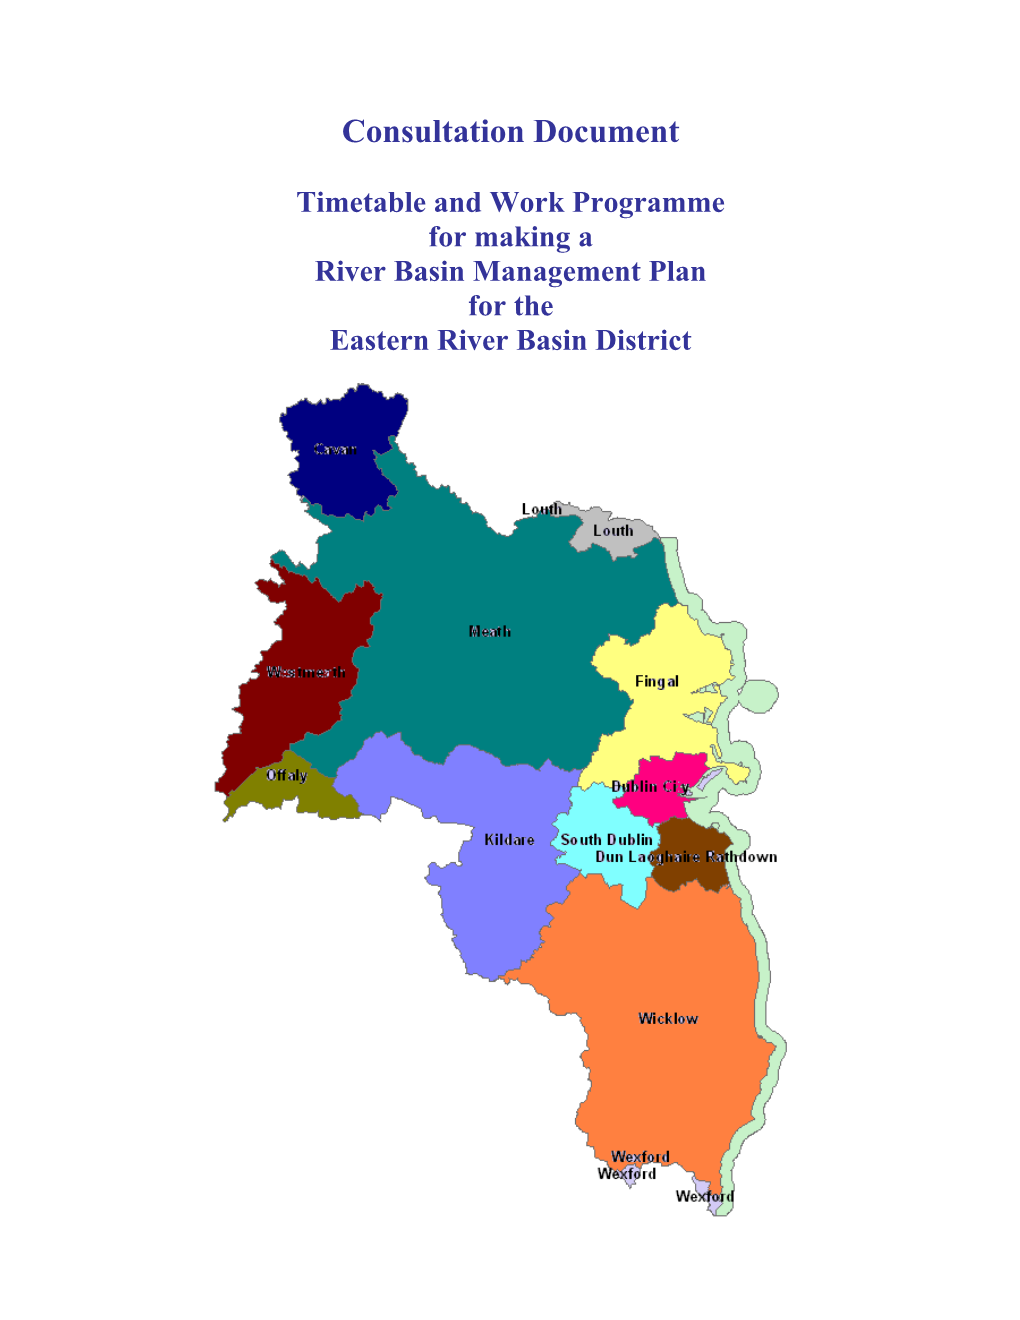 Timetable and Work Programme